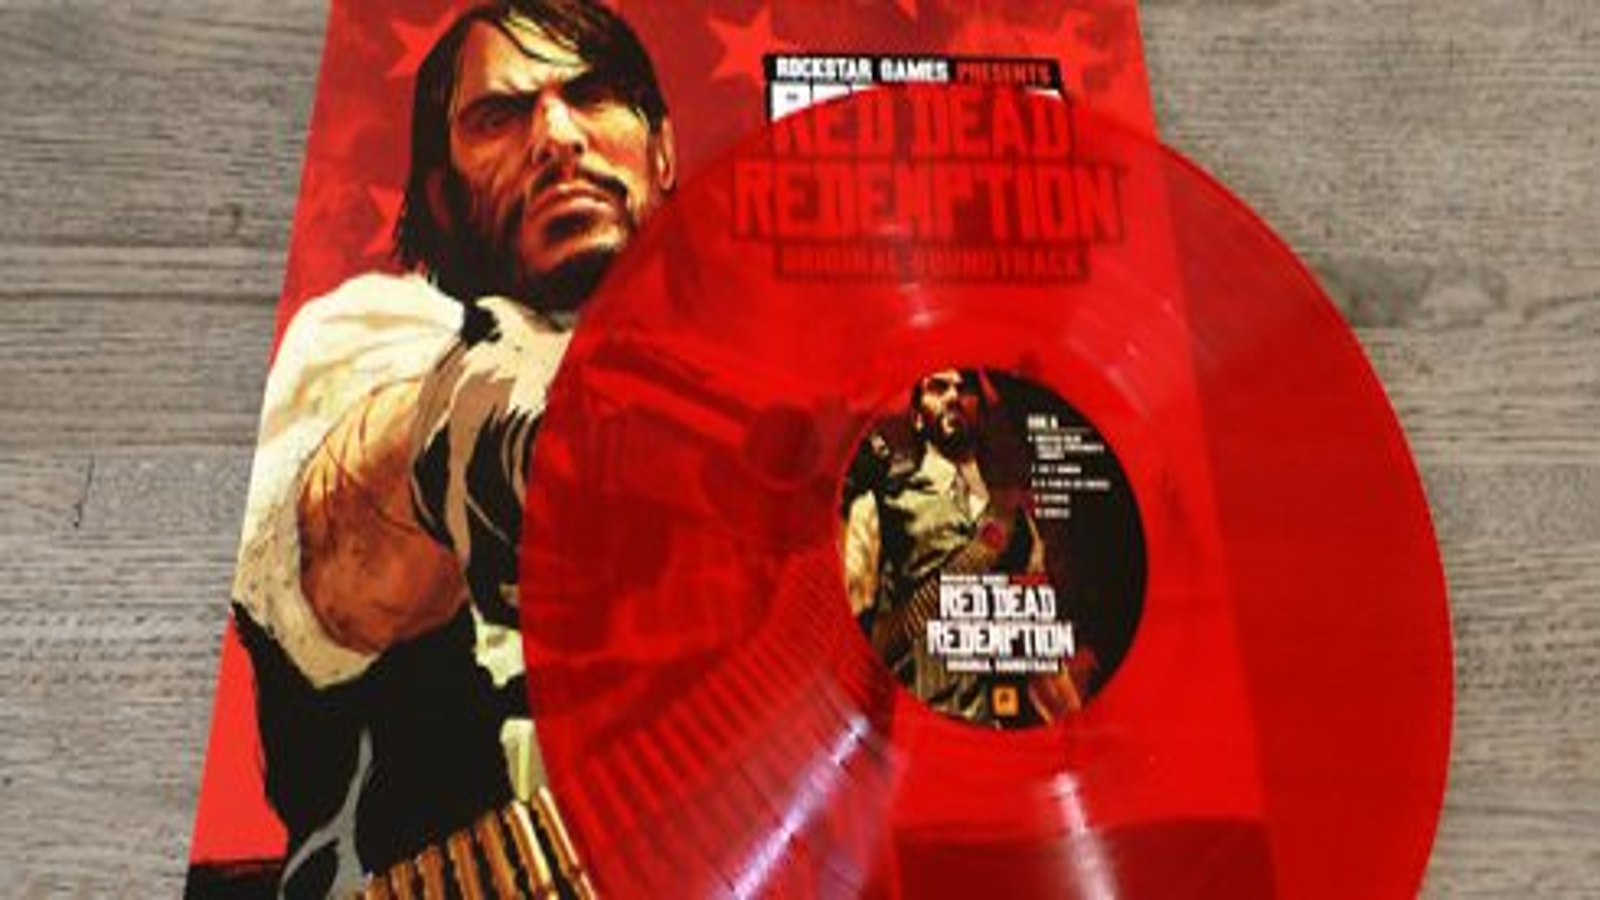 Red vinyl LP of Dead Redemption Soundtrack now available through Rockstar Warehouse VG247